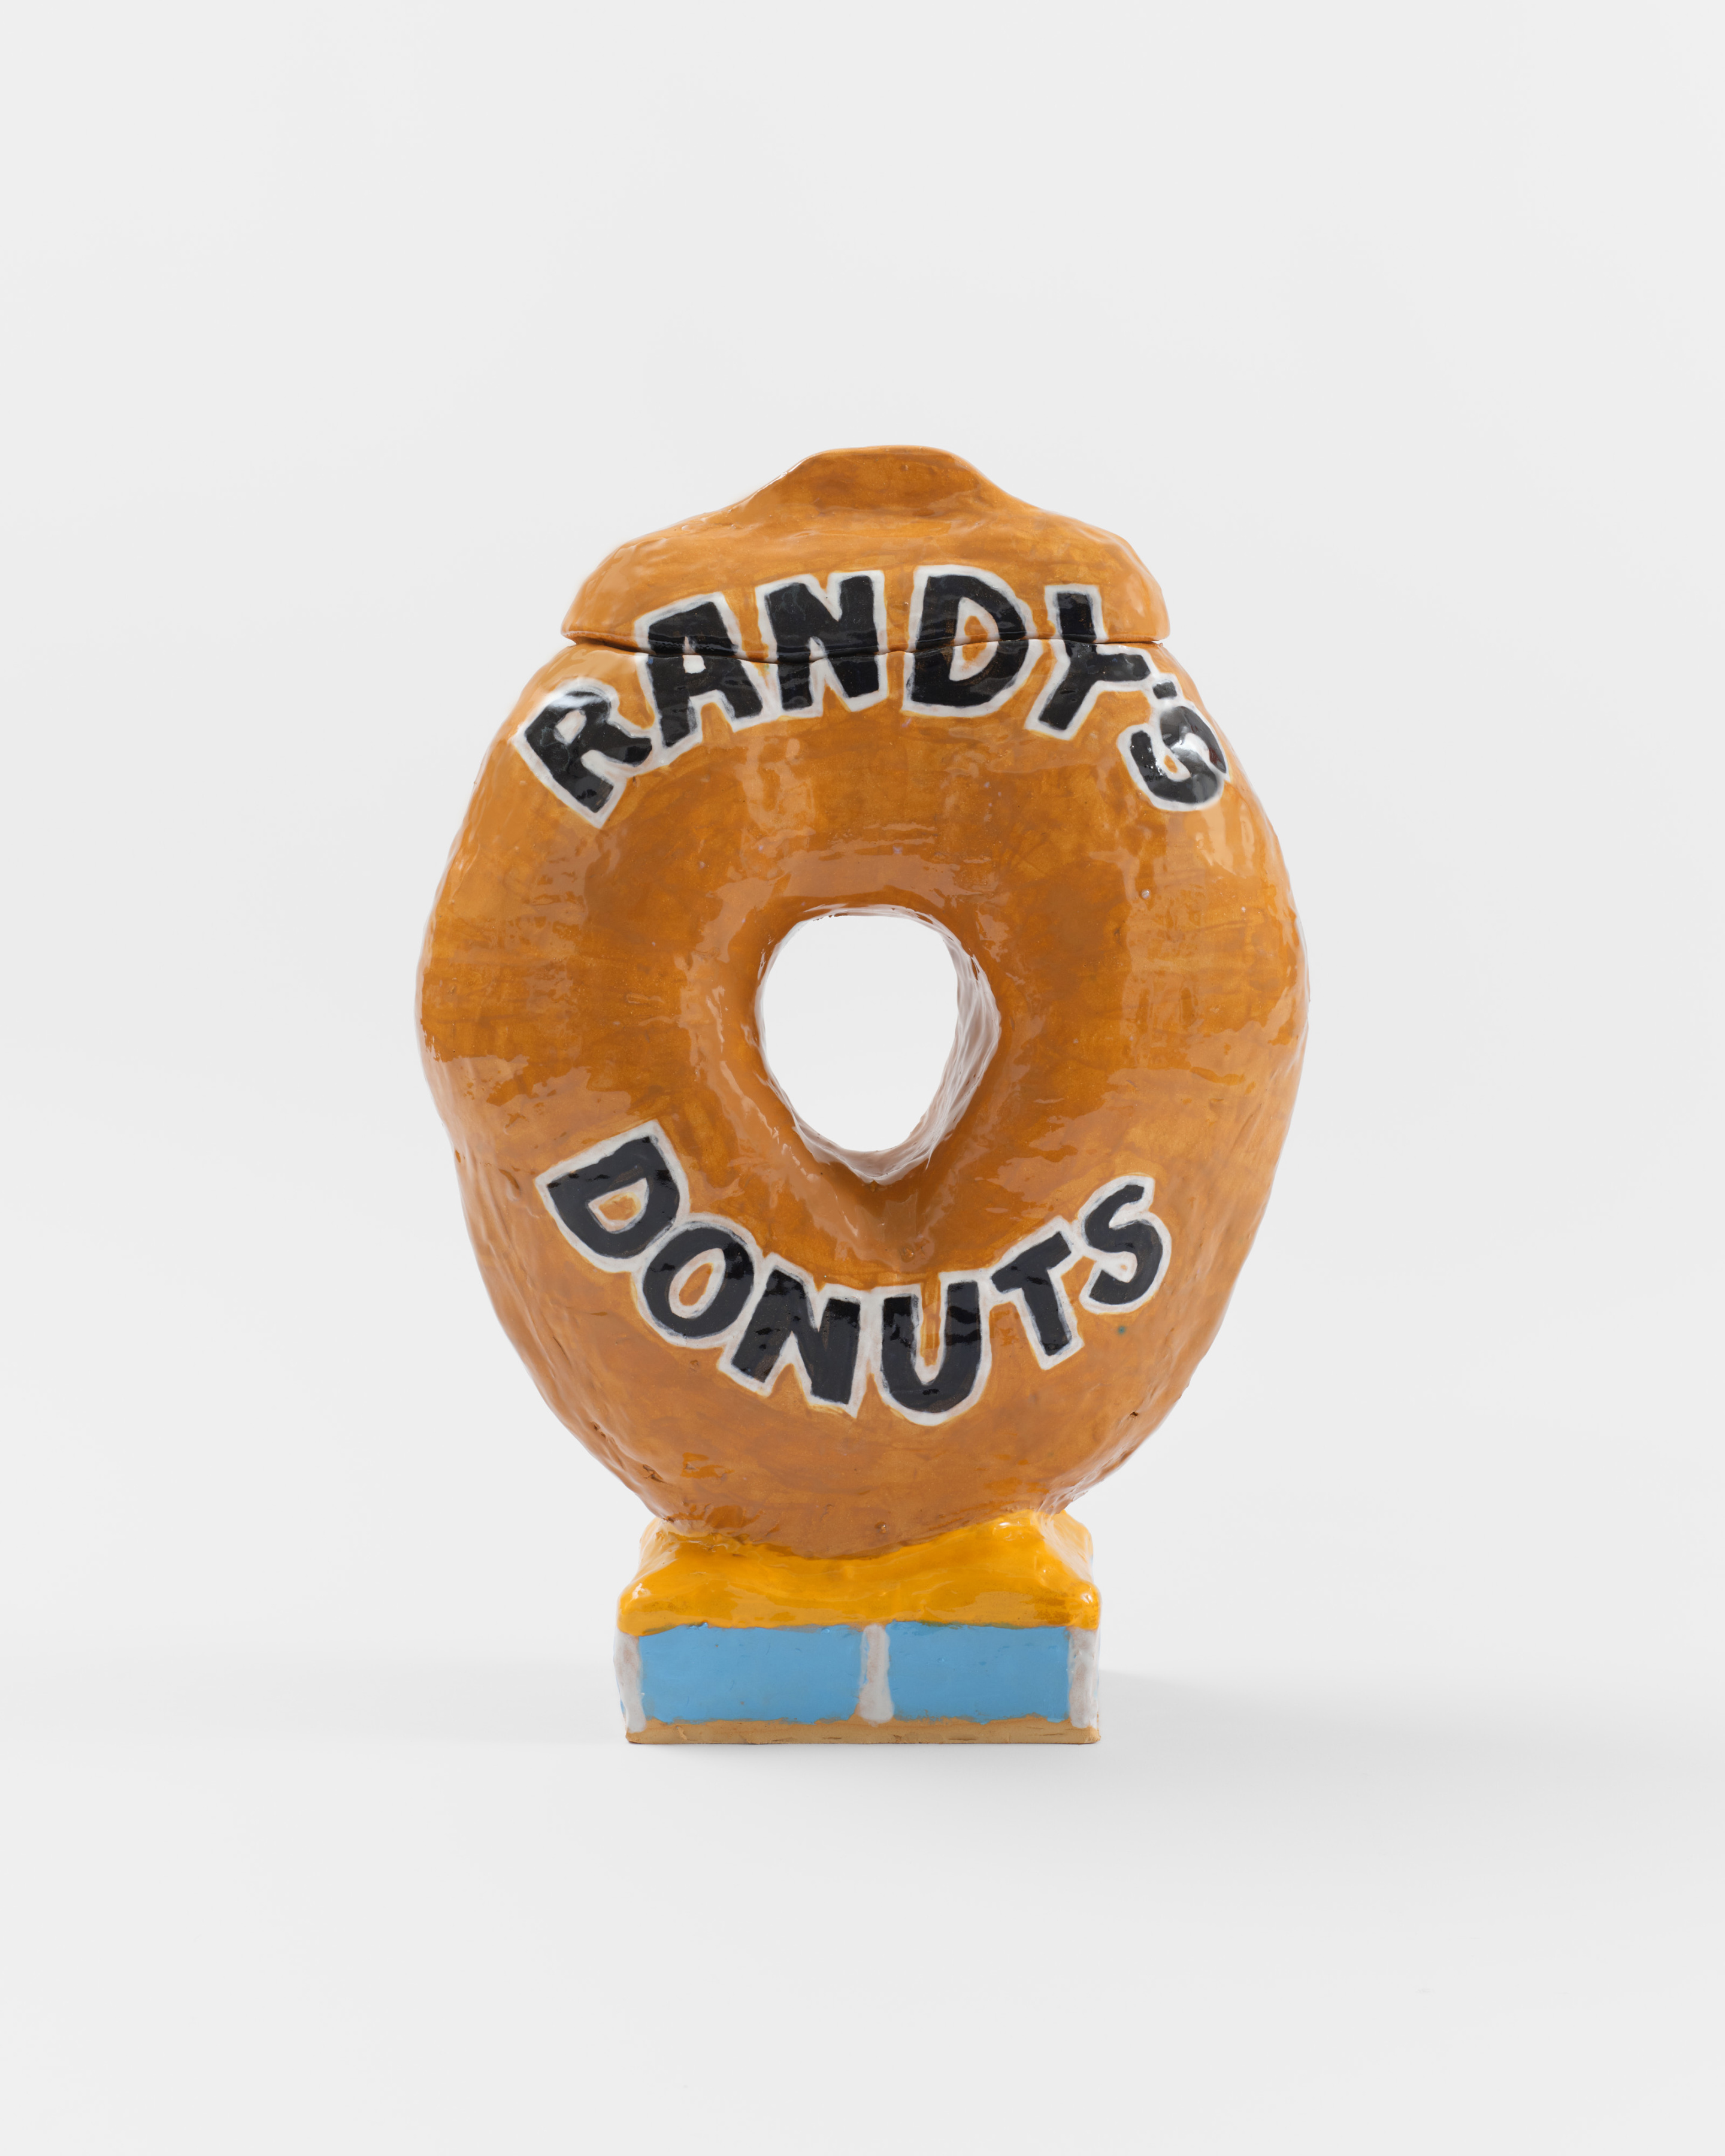 A ceramic sculpture of a donut resembling the Los Angeles landmark "Randy's Donuts" donut sculpture. 